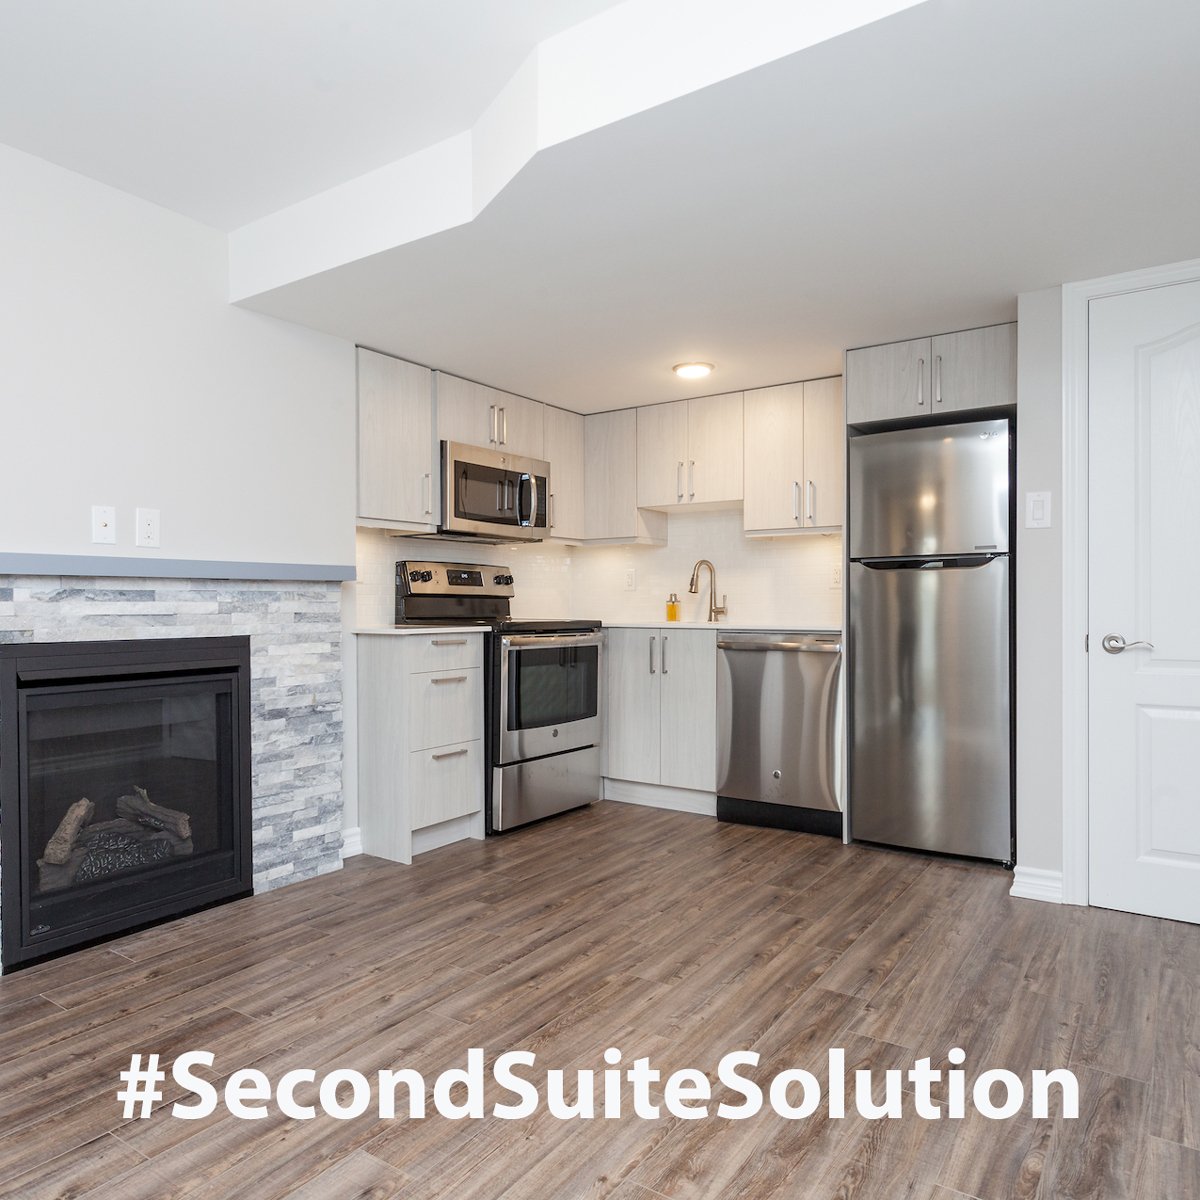 Make the most of your basement this summer with Penguin Basements' Second Suite Solution 🐧💼 Convert your basement into a legal rental apartment and start earning income! #PenguinBasements #SecondSuiteSolution #RentalApartment